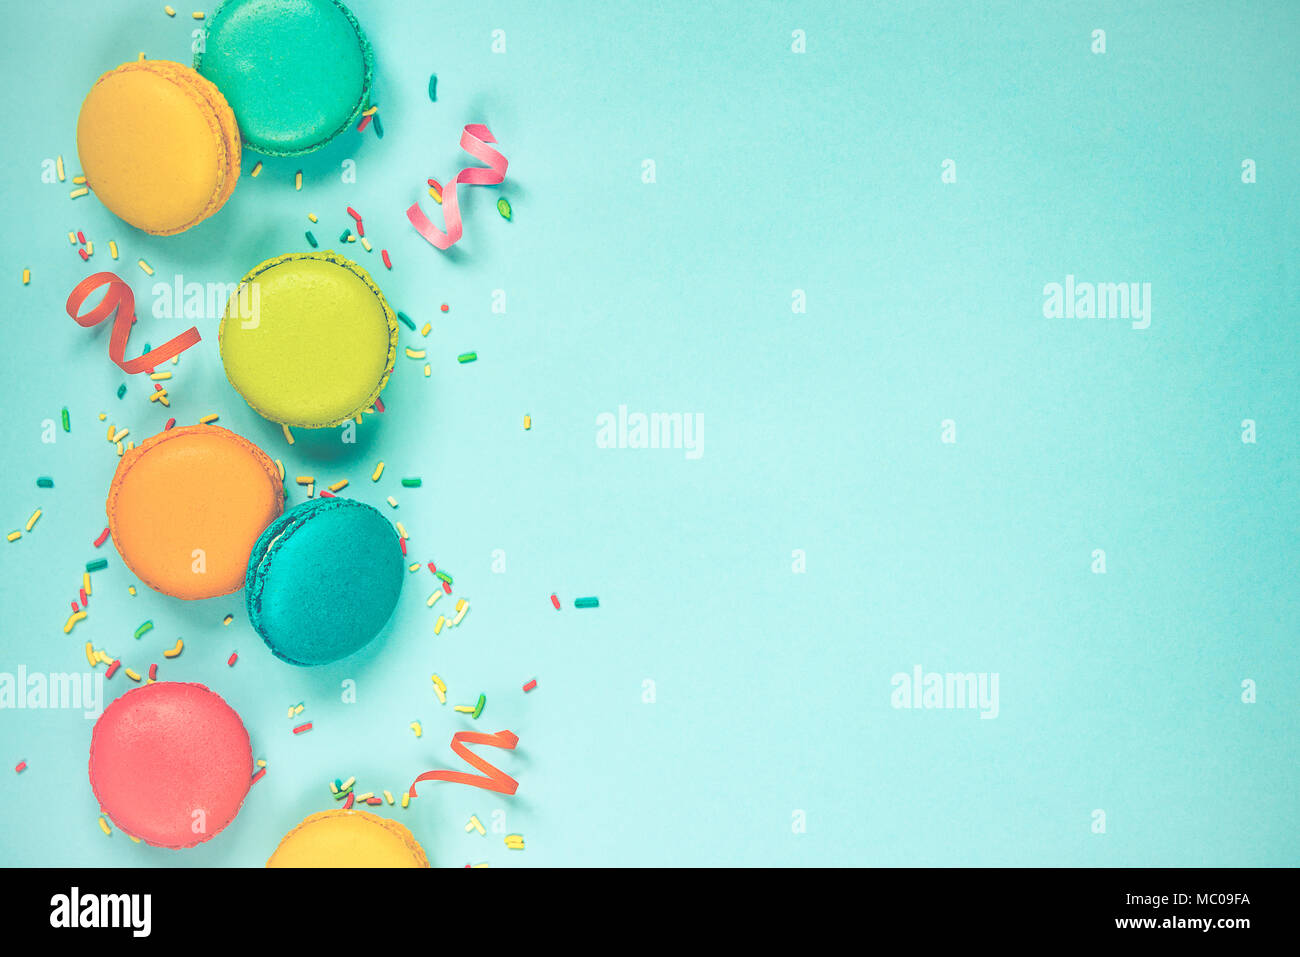 Top view of colorful macaroons, sugar sprinkles and party ribbons arranged over blue background. Copy space. Vintage effect. Stock Photo